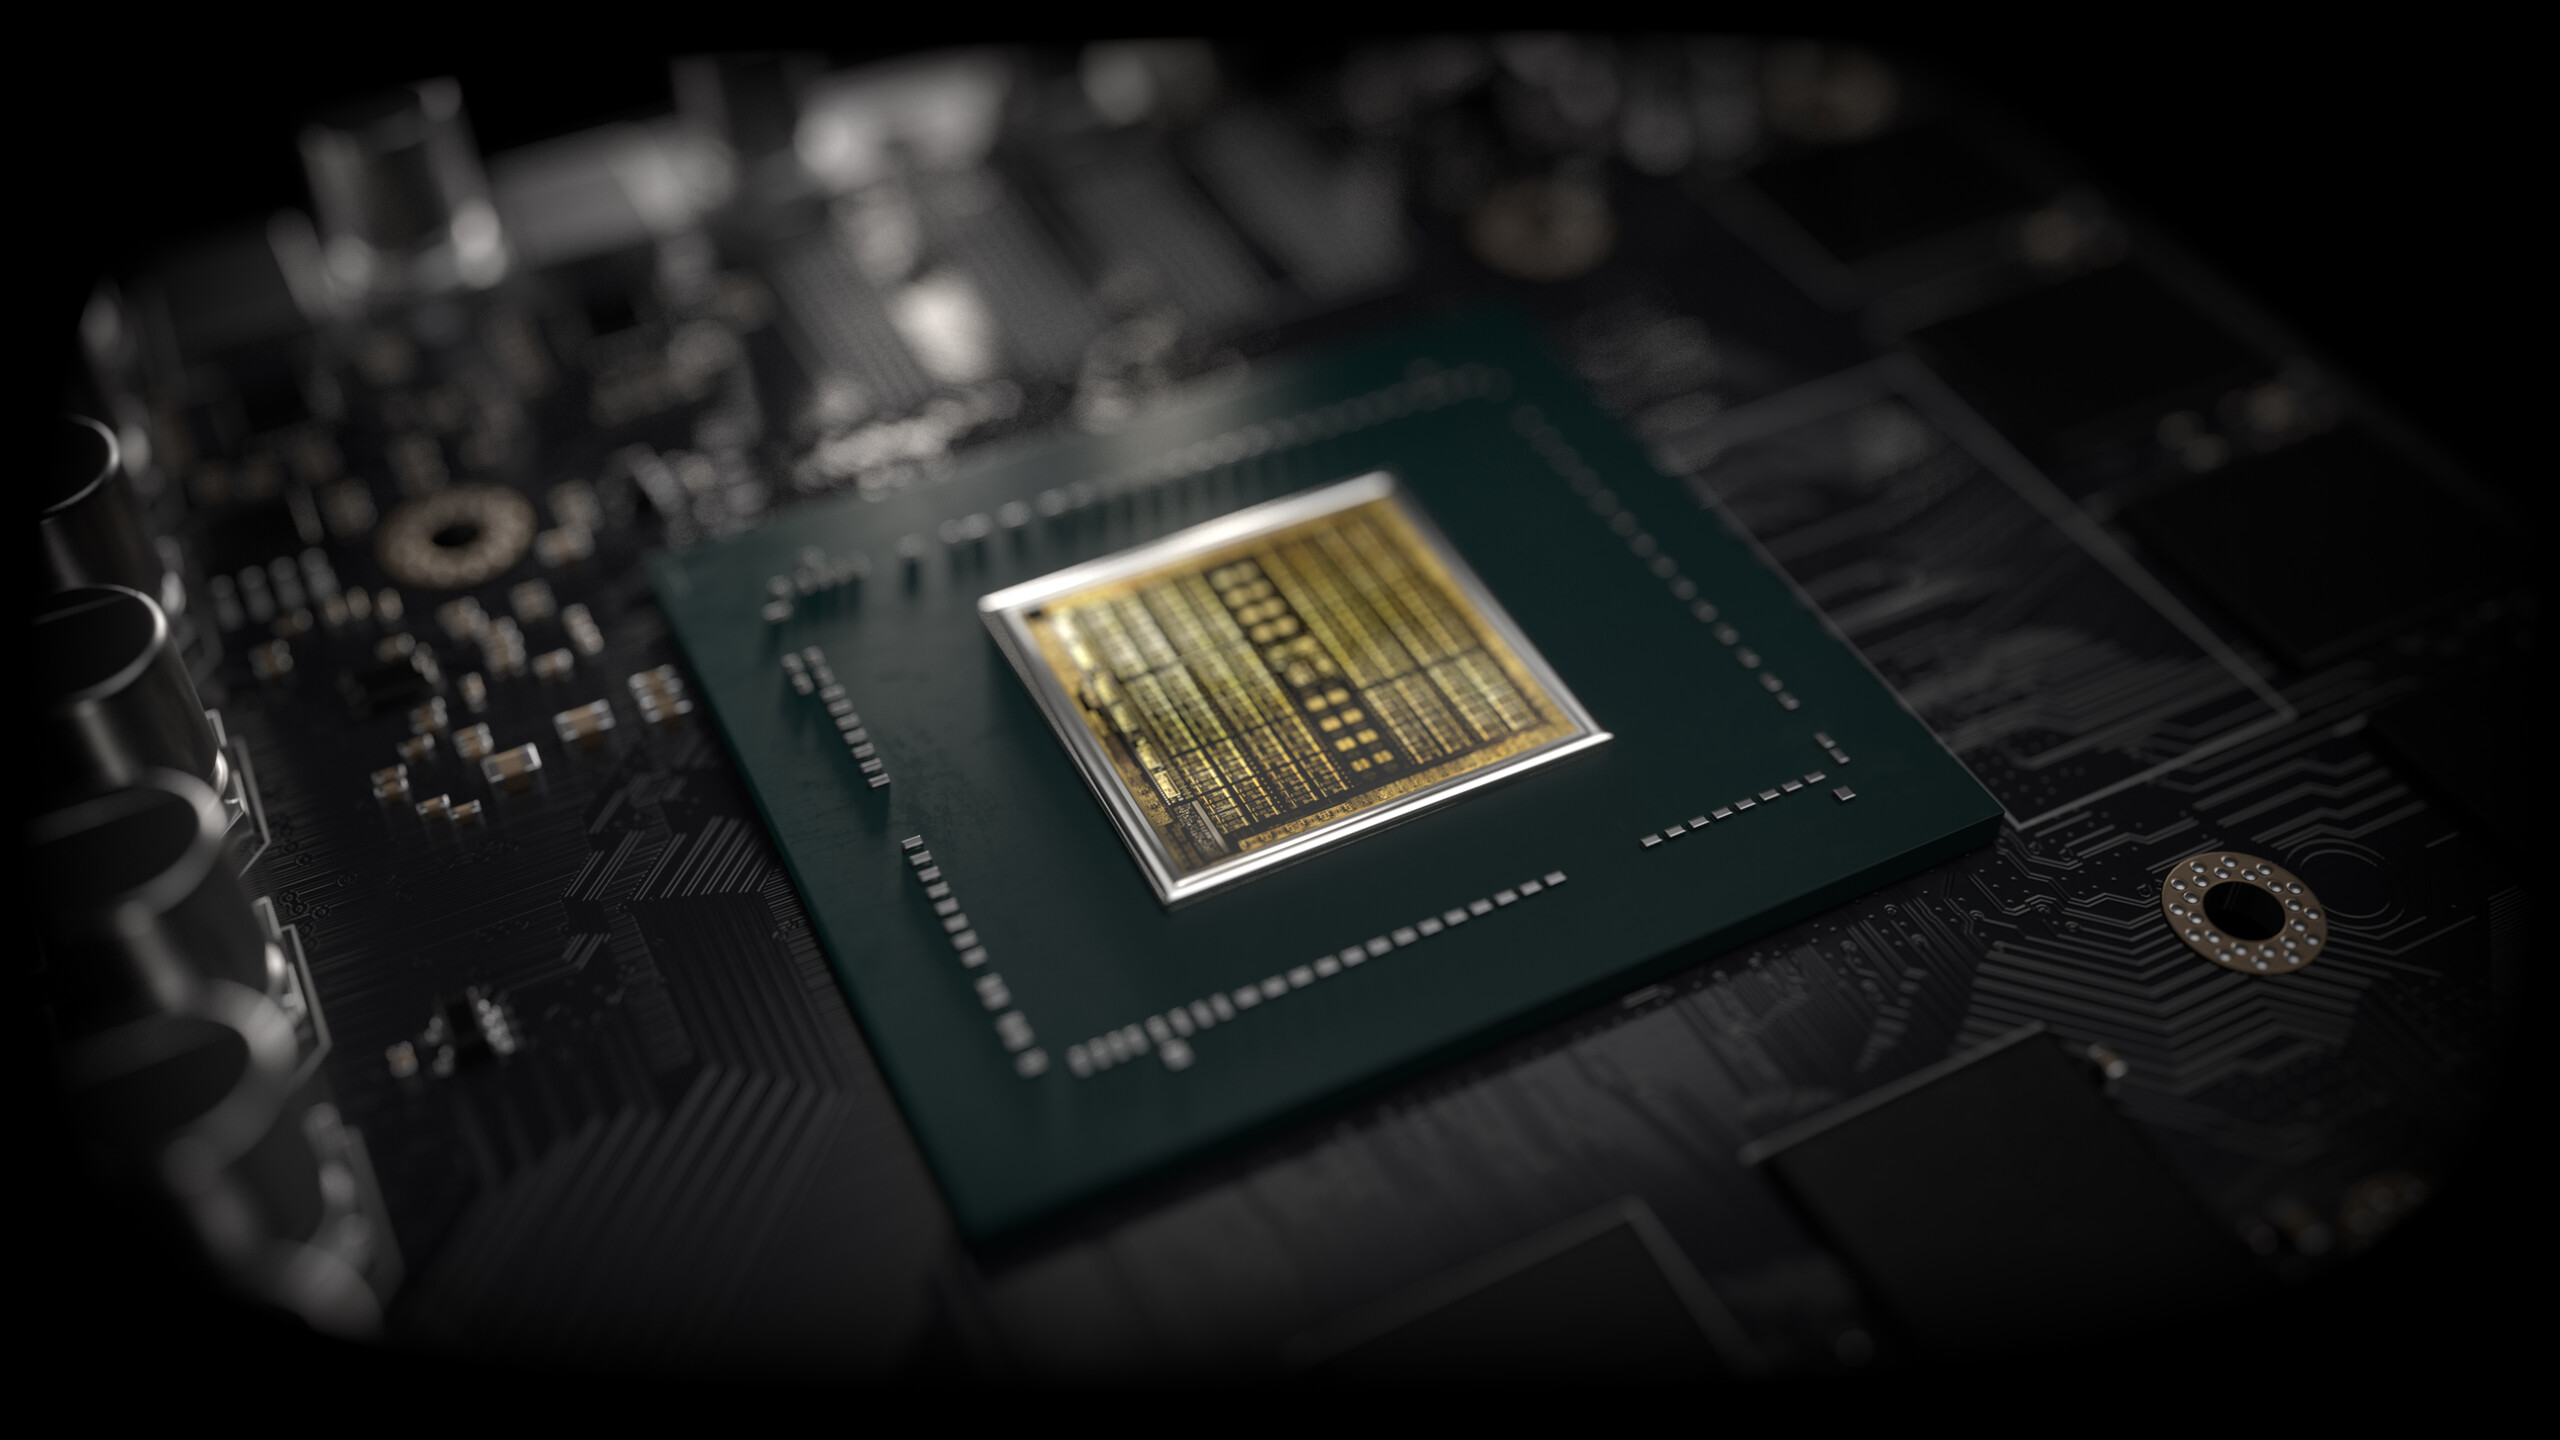 Centrum Hovedsagelig Og hold Exclusive first benchmarks of NVIDIA RTX 2070 Super Mobile show appreciable  gains over the RTX 2070 Mobile, new RTX 2060 Mobile leads the RTX 2070 Max-Q  - NotebookCheck.net News